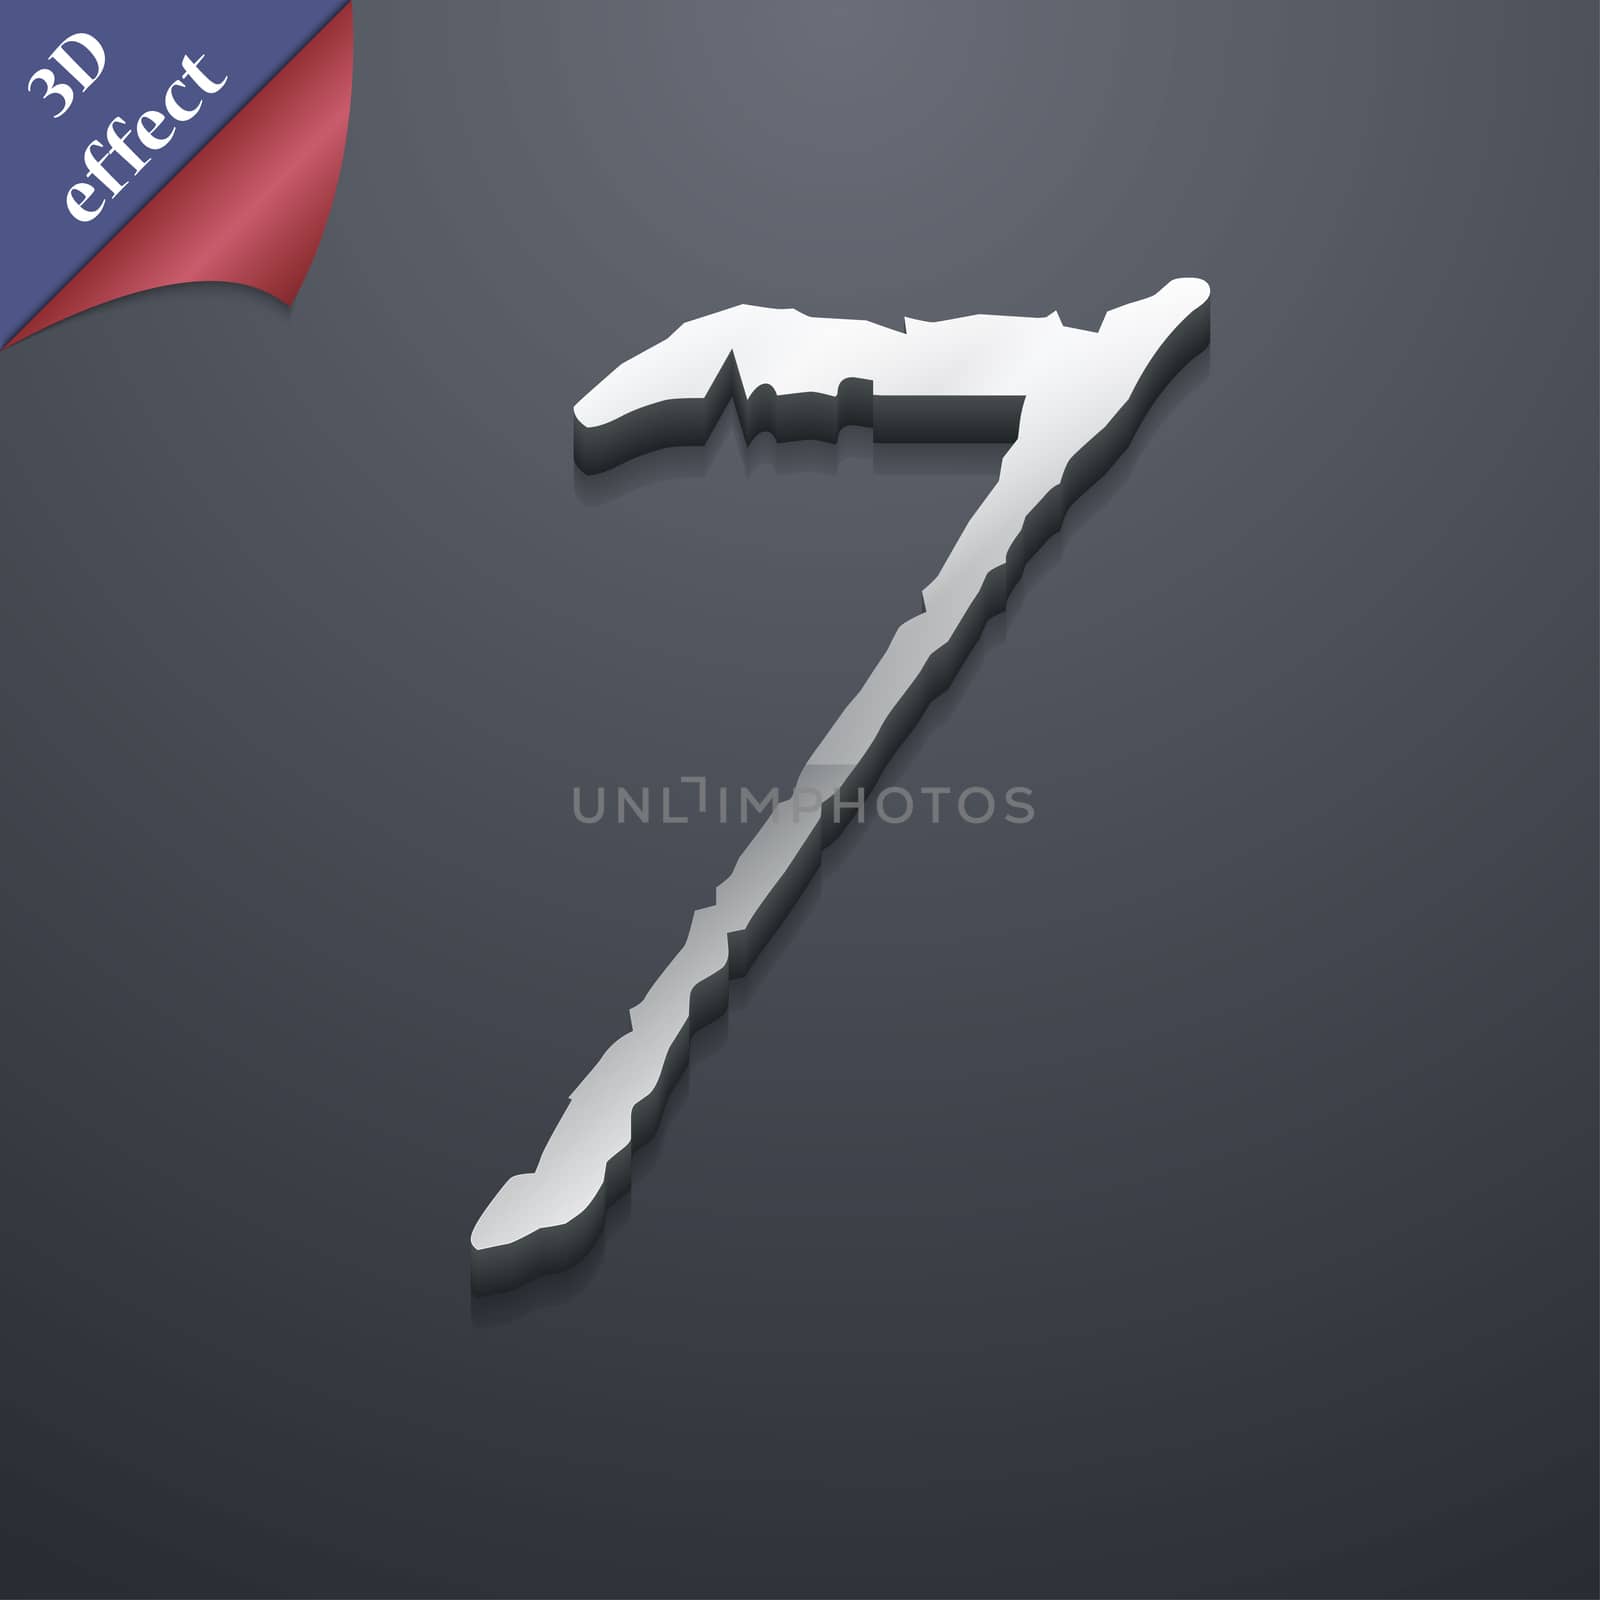 number seven icon symbol. 3D style. Trendy, modern design with space for your text illustration. Rastrized copy